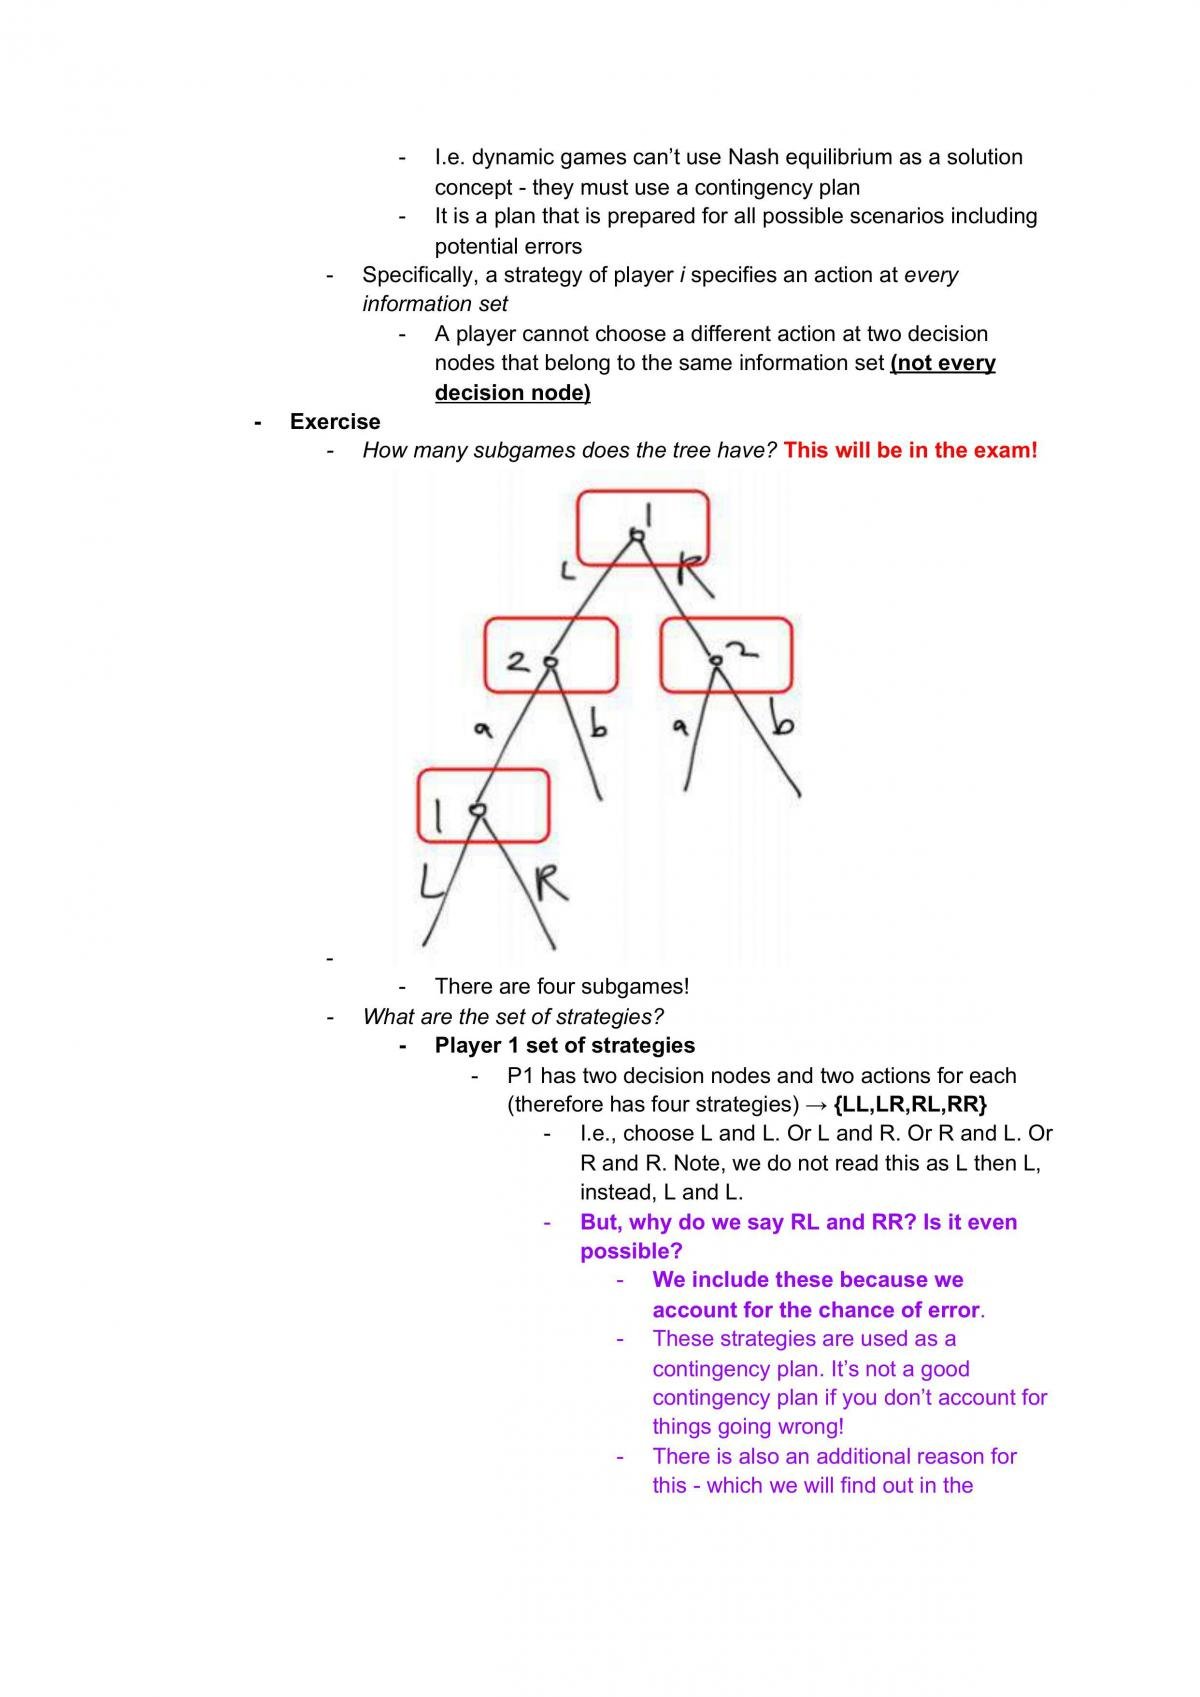 HD Notes - UTS 23592 Game Theory - Page 70